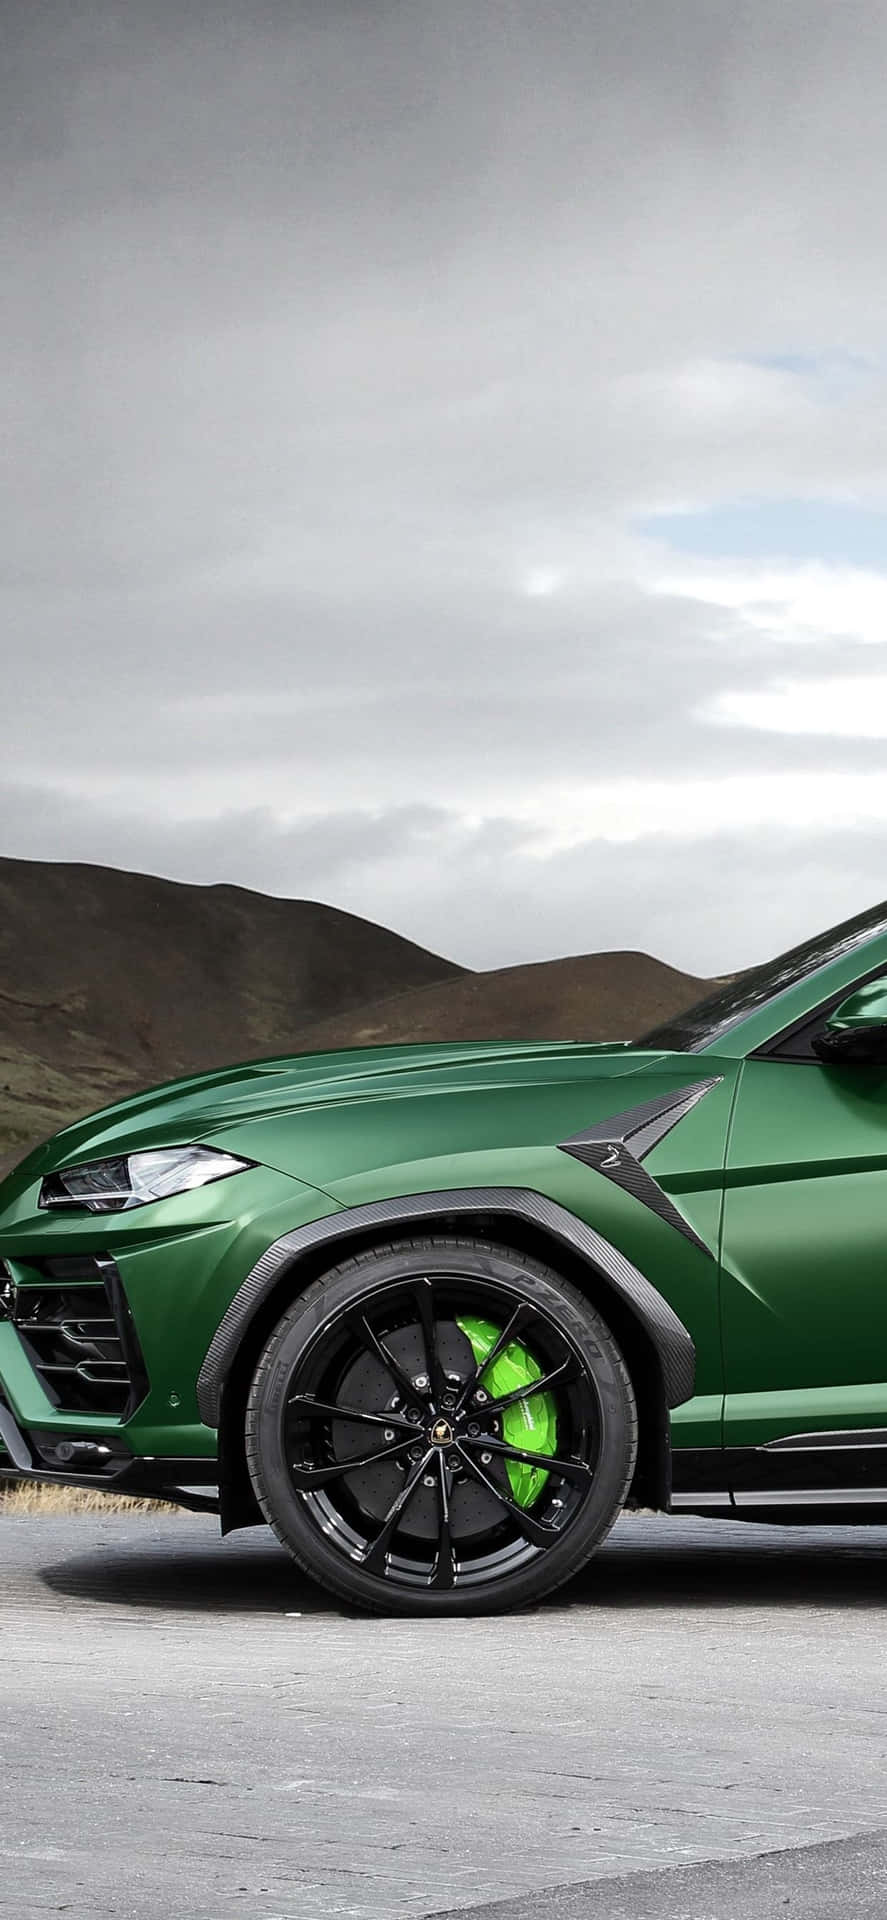 Image  Veloce Lamborghini shows off its uniquely stunning green with gradient details Wallpaper